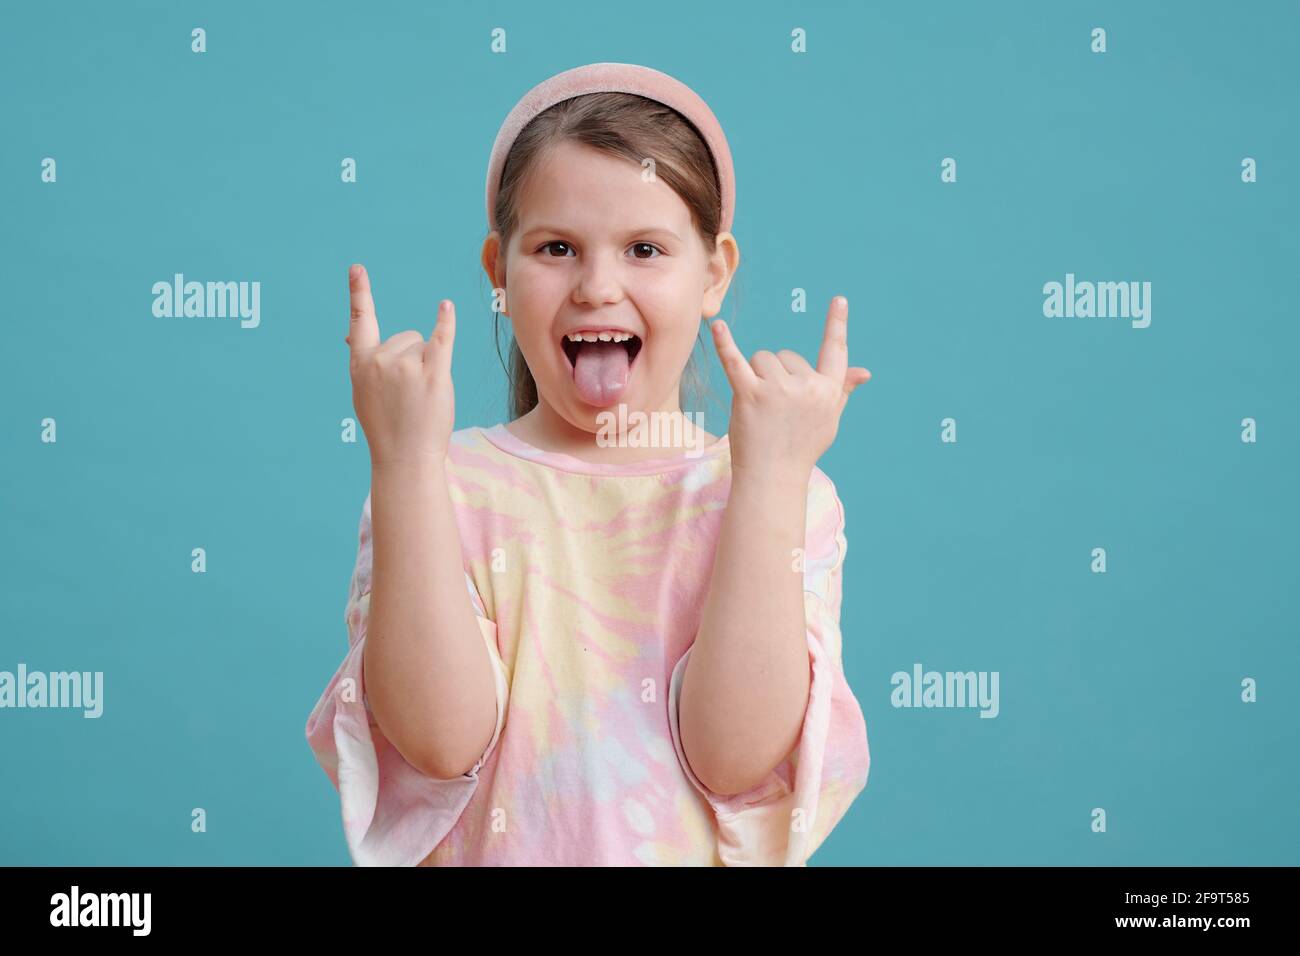 Portrait of funny little girl showing her tongue and posing at camera against the blue background Stock Photo